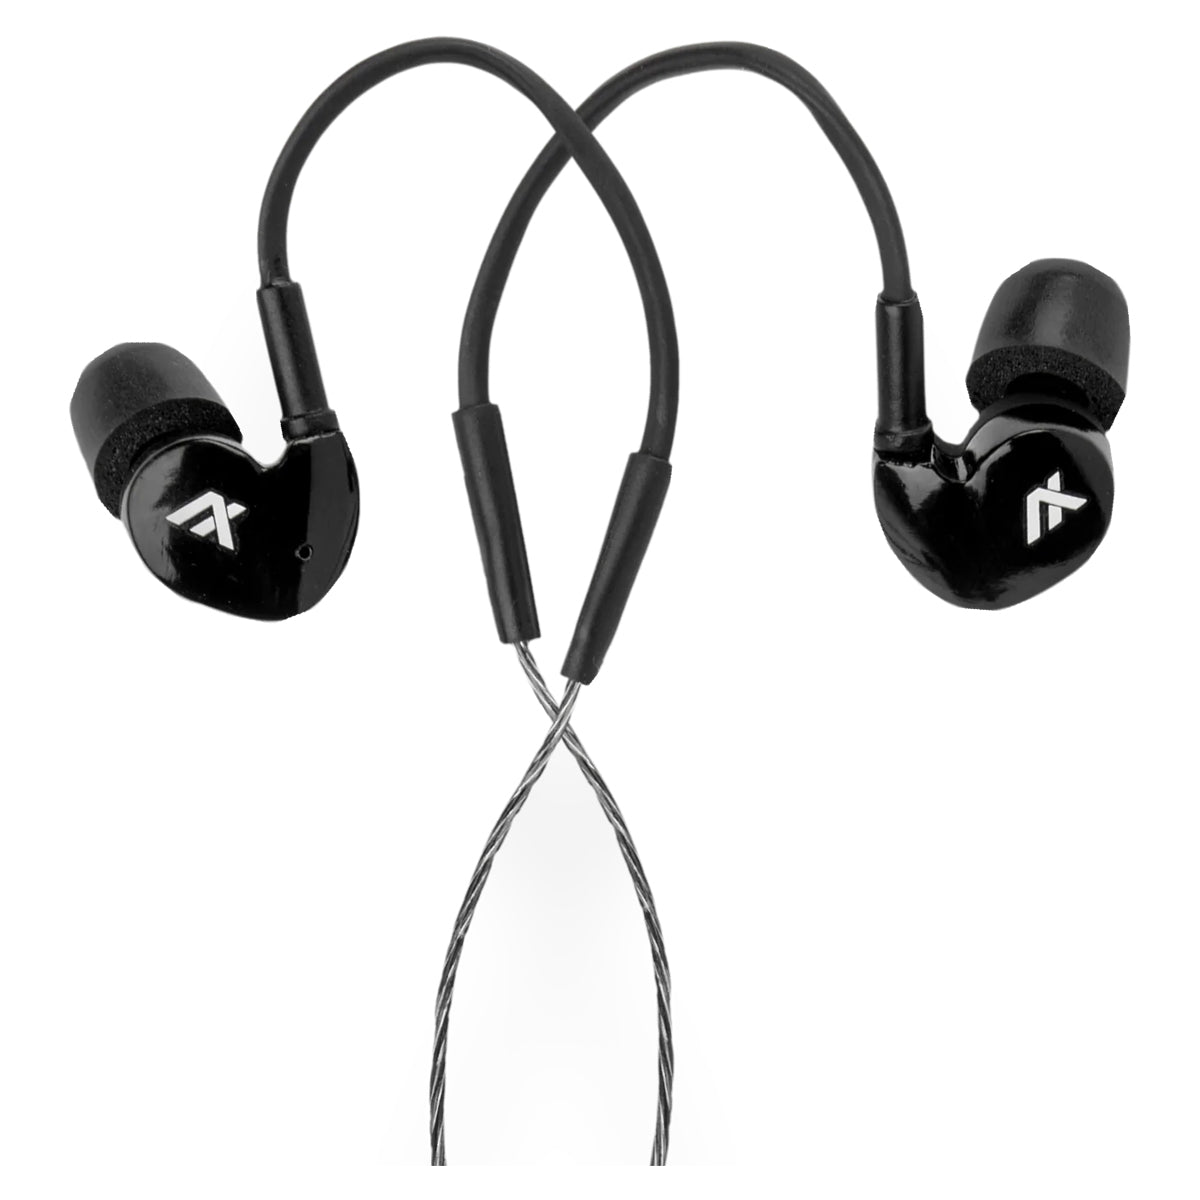 Axil GS Extreme 2.0 Ear Buds in  by GOHUNT | Axil - GOHUNT Shop